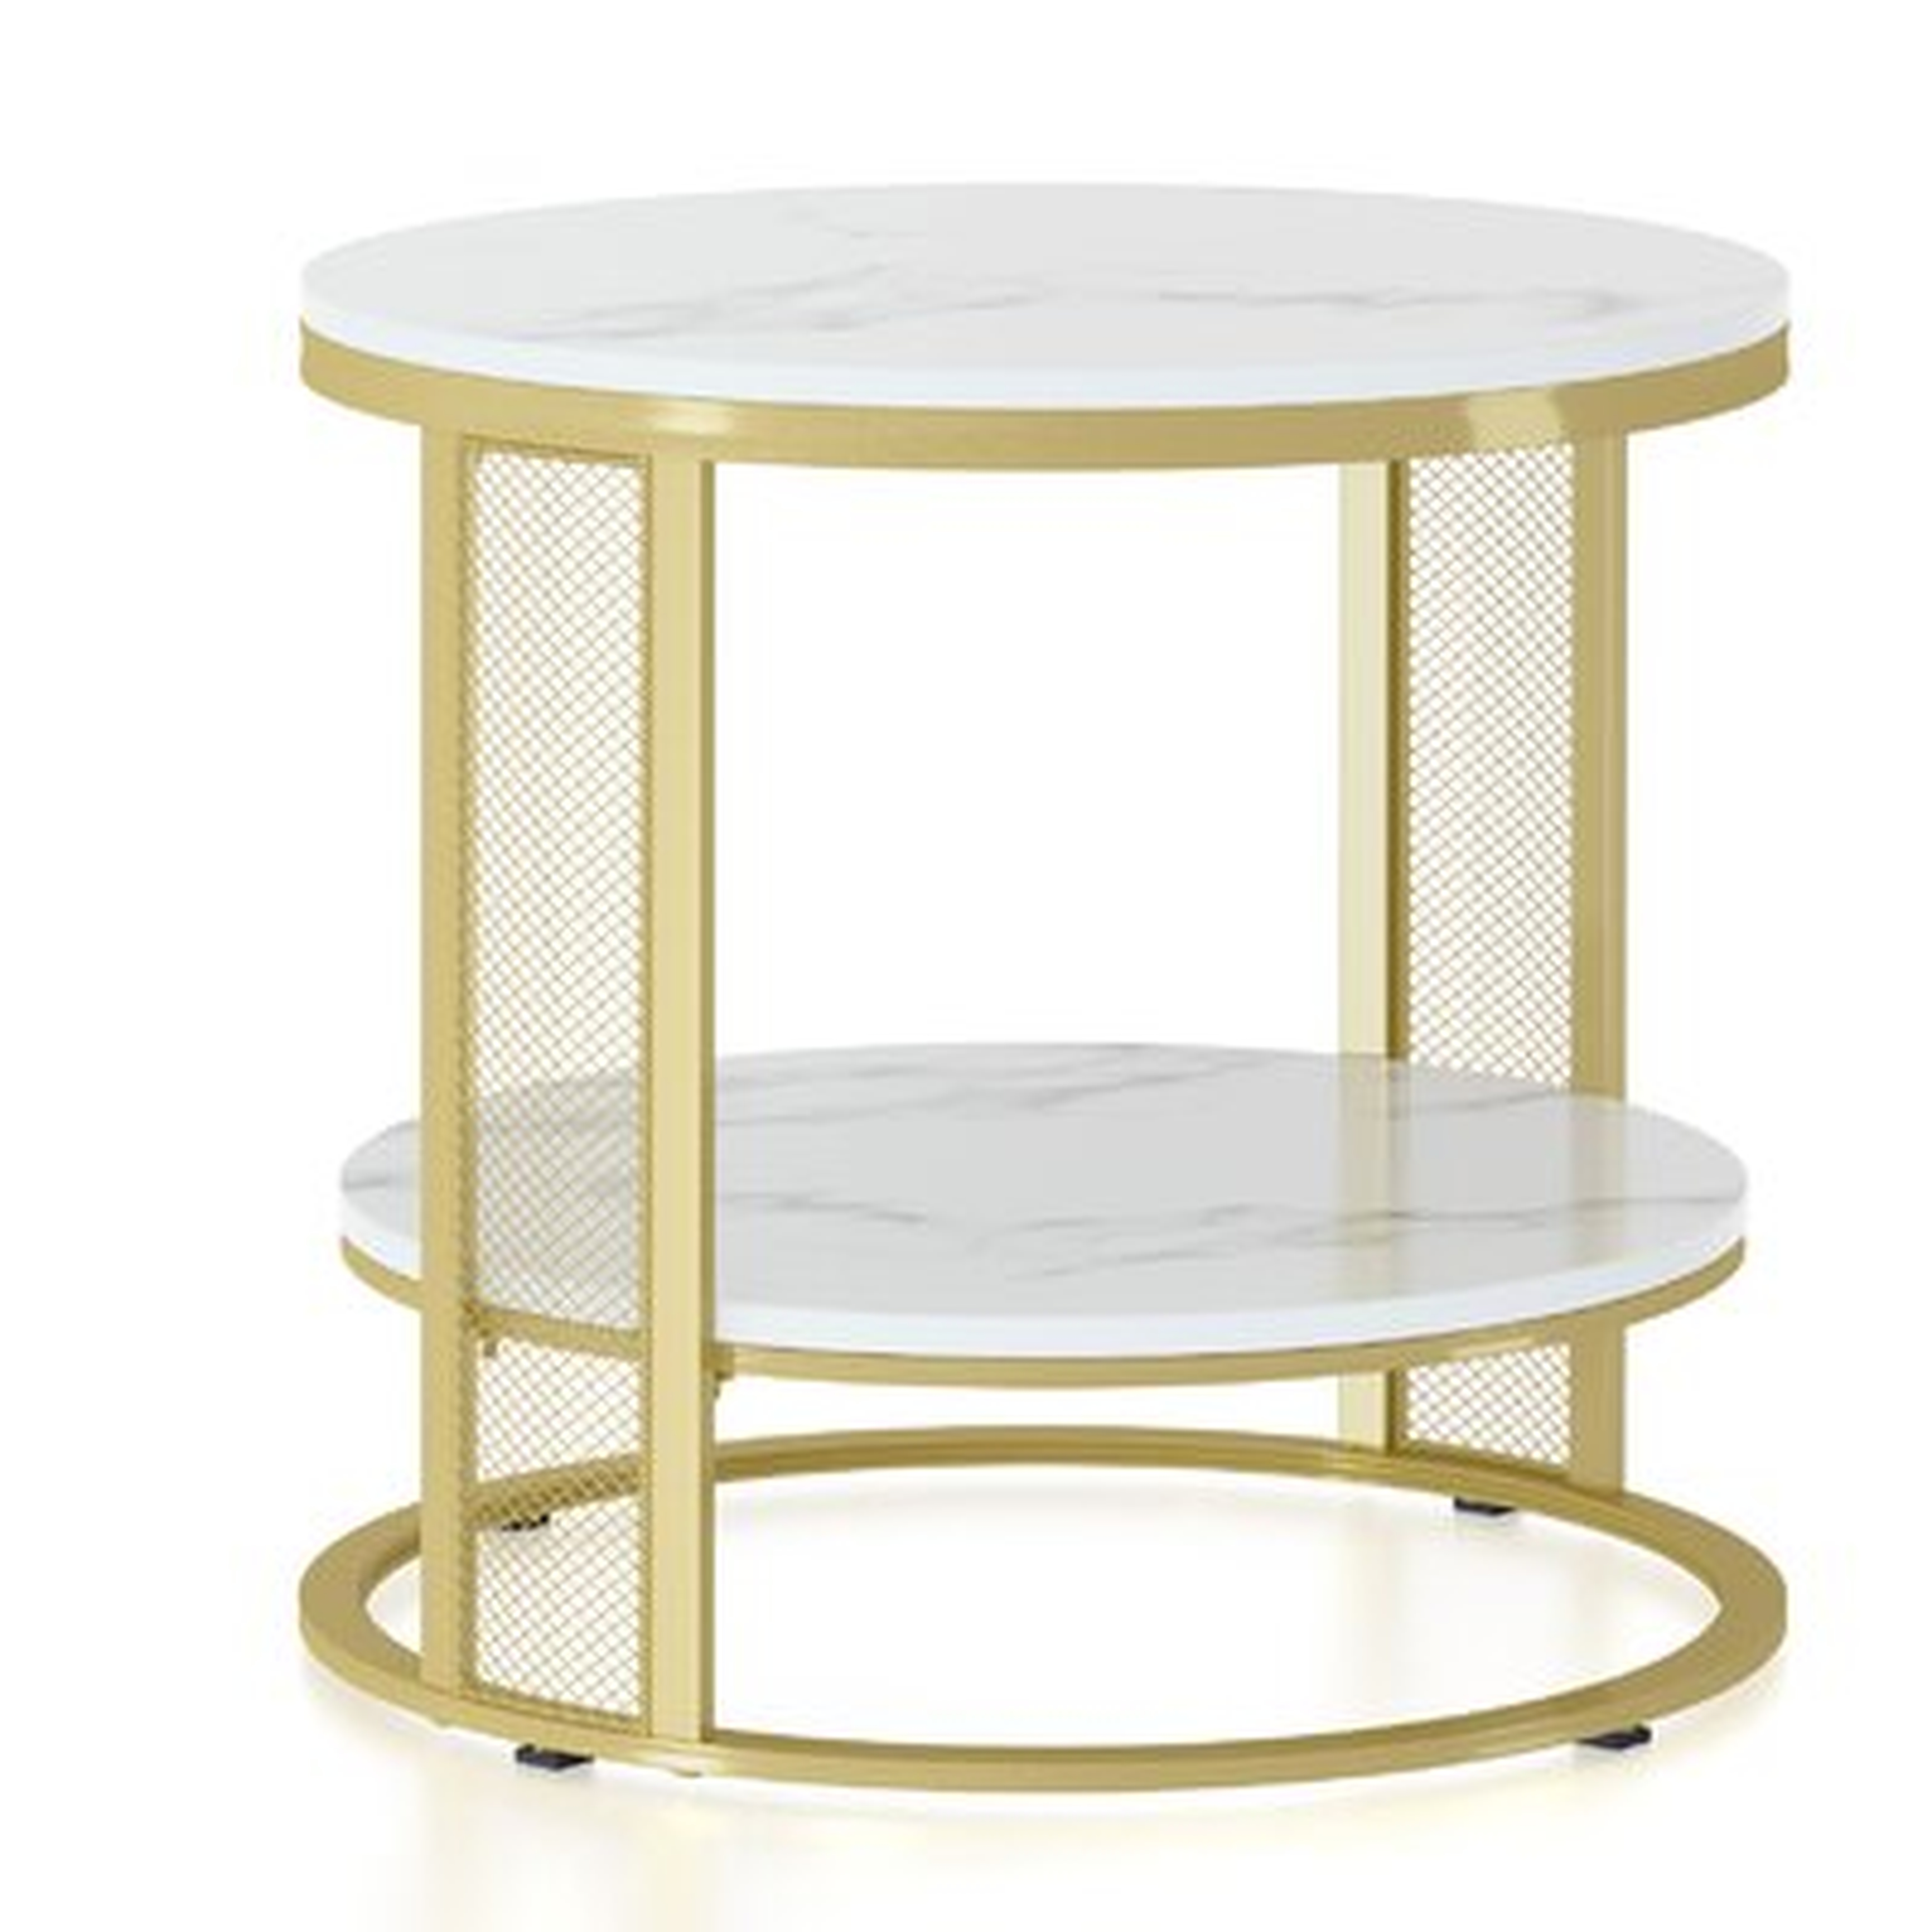 With A Sleek Golden Metal Iron Base For Added Style.Featuring 2-Tier Unique Marble Table For A Durable Foundation.No Special Skills, Follow Instruction And Easy To Assemble Together.Finely Polished Edge Prevent Families From Getting Injuries During Usage. - Wayfair